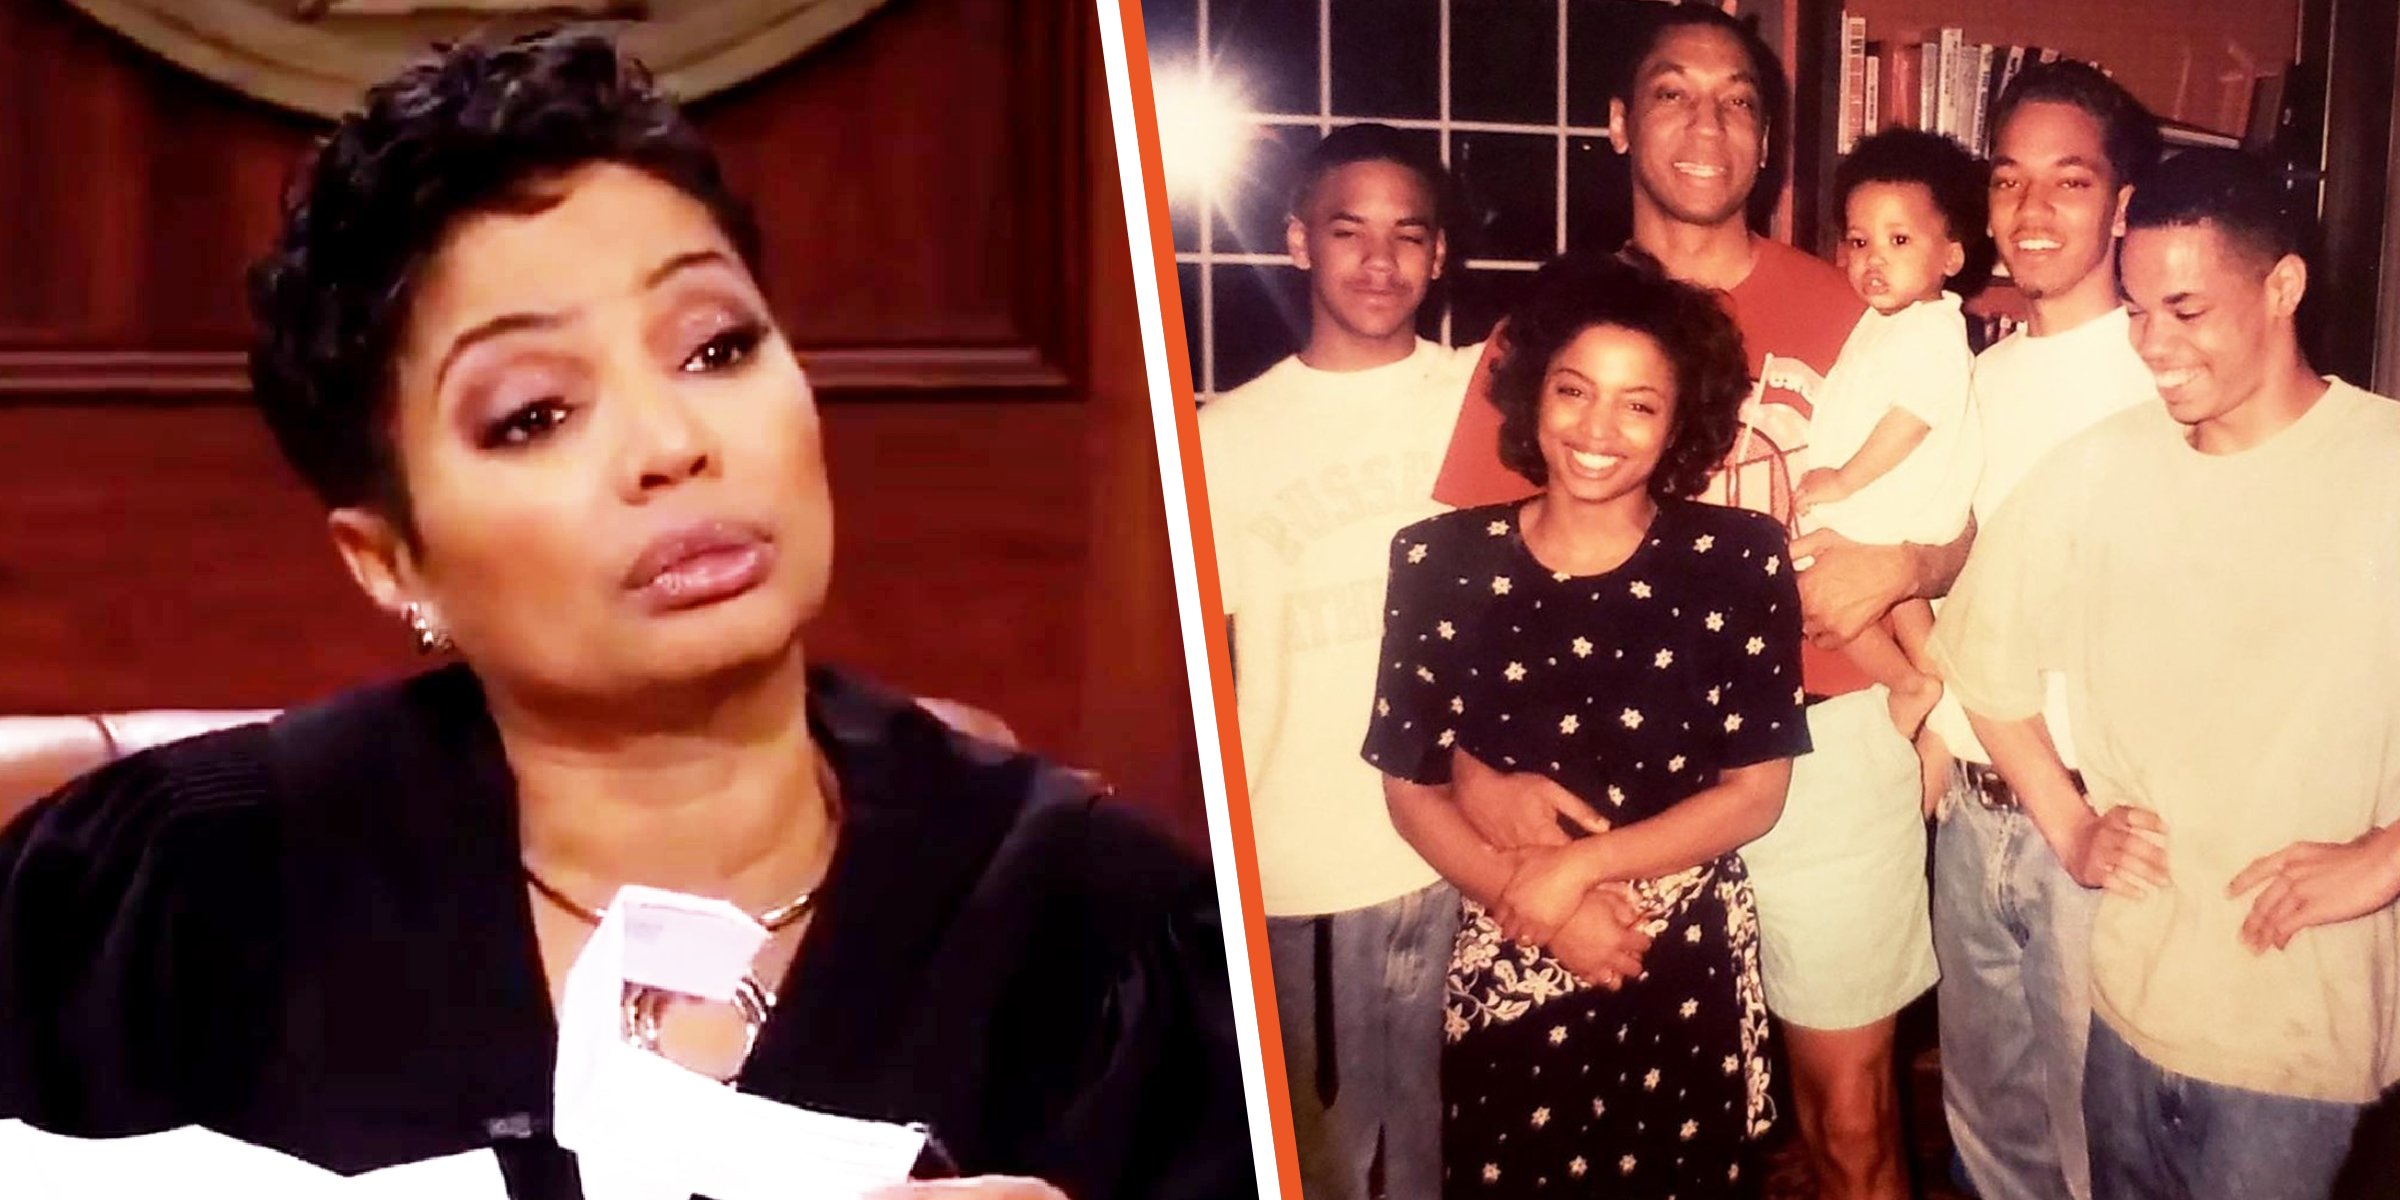 TV Judge Lynn Toler Is 'in a Million Pieces' after Husband of 33 Years